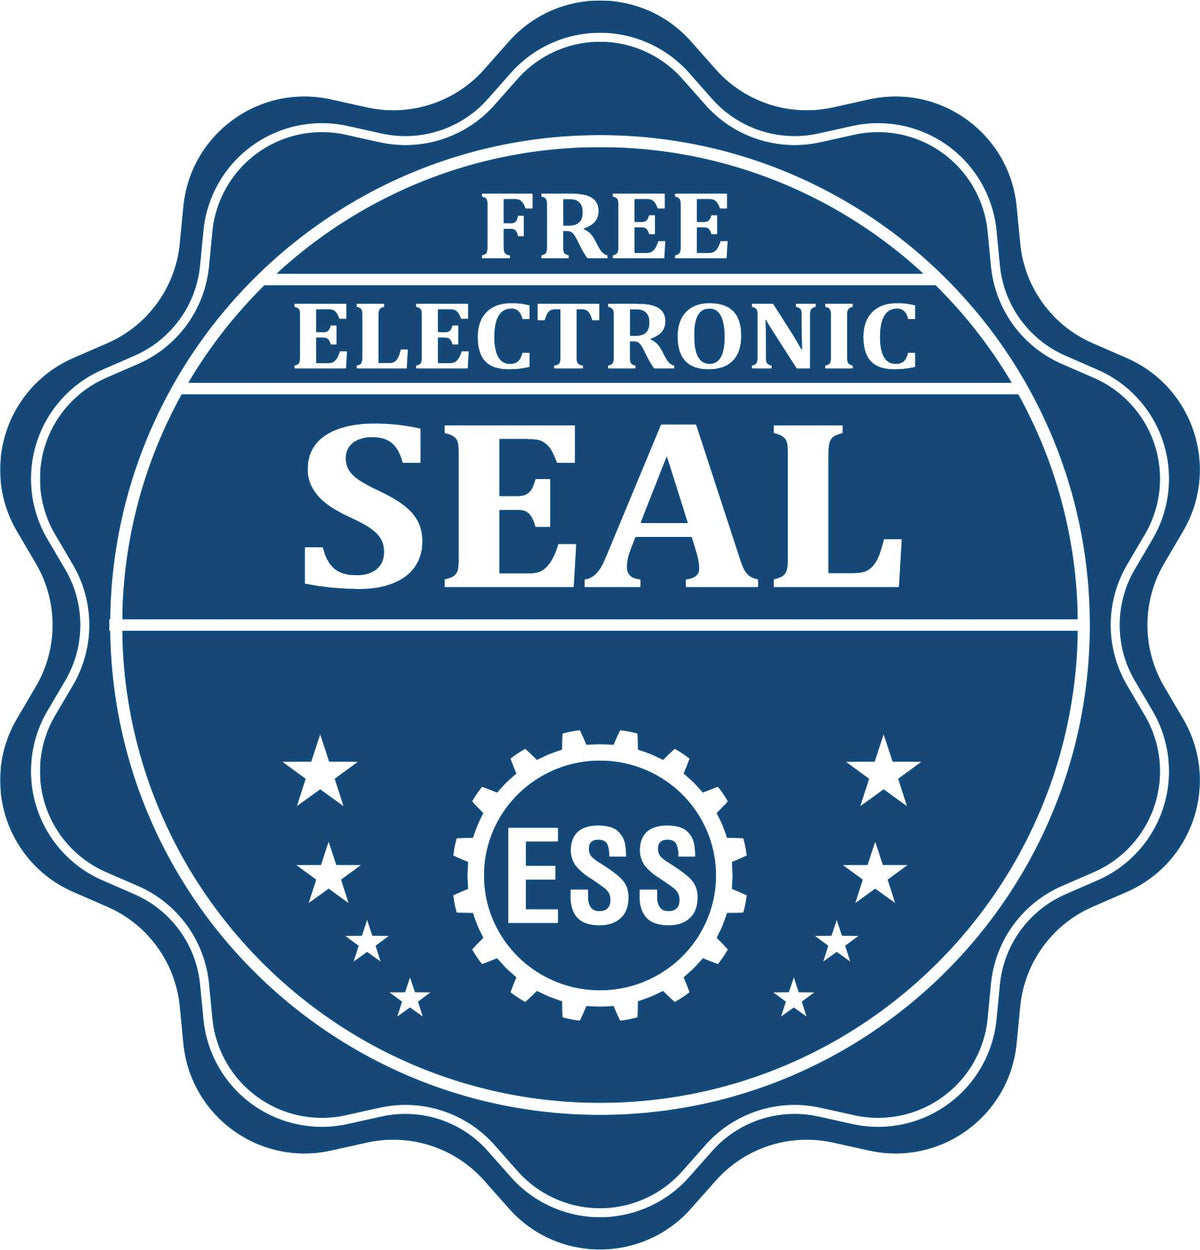 A badge showing a free electronic seal for the State of Guam Long Reach Architectural Embossing Seal with stars and the ESS gear on the emblem.